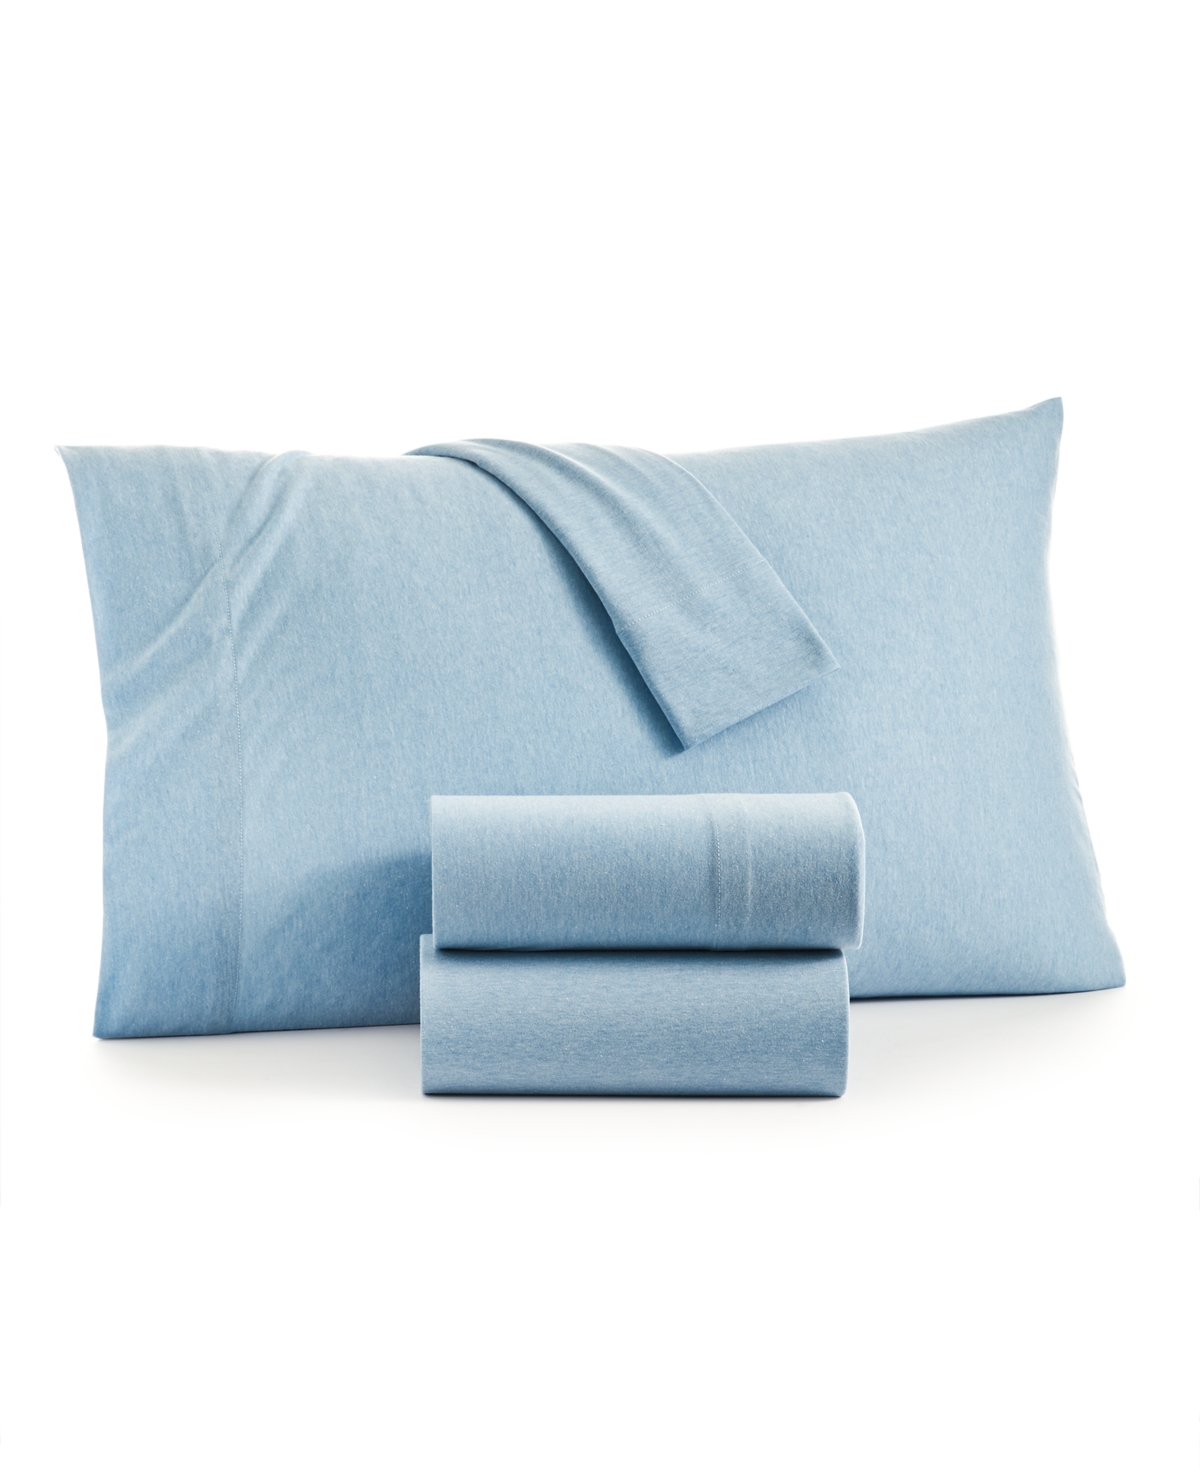 Home Design Jersey 4-pc. Sheet Set, Queen, Created For Macy's In Horizon Blue